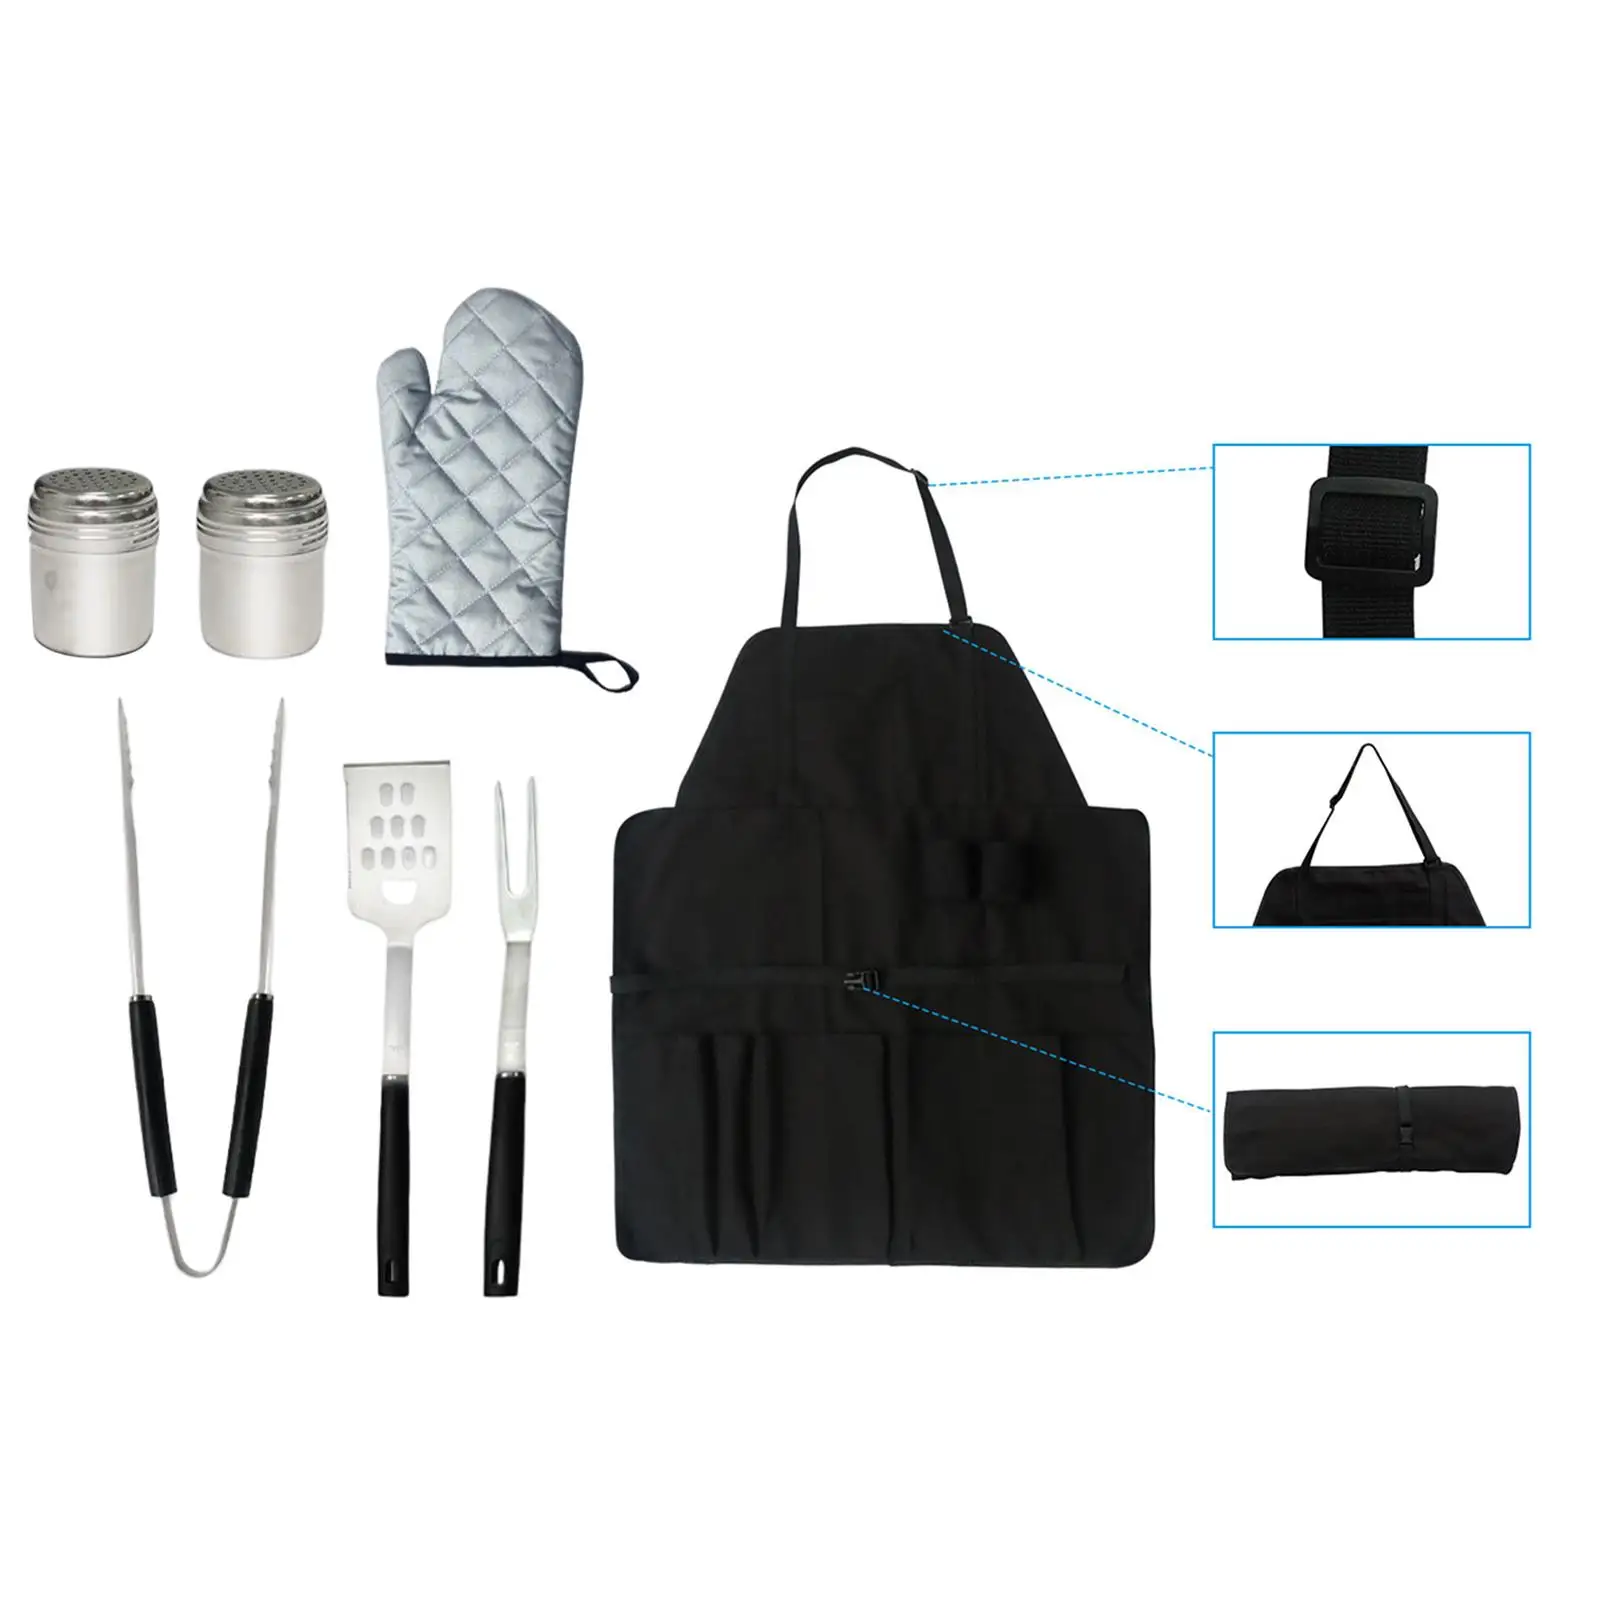 Multipurpose Barbecue Apron Practical Cooking Supplies Grill Accessories chen Gadget Set Durable Clip Glove for Holiday Chef